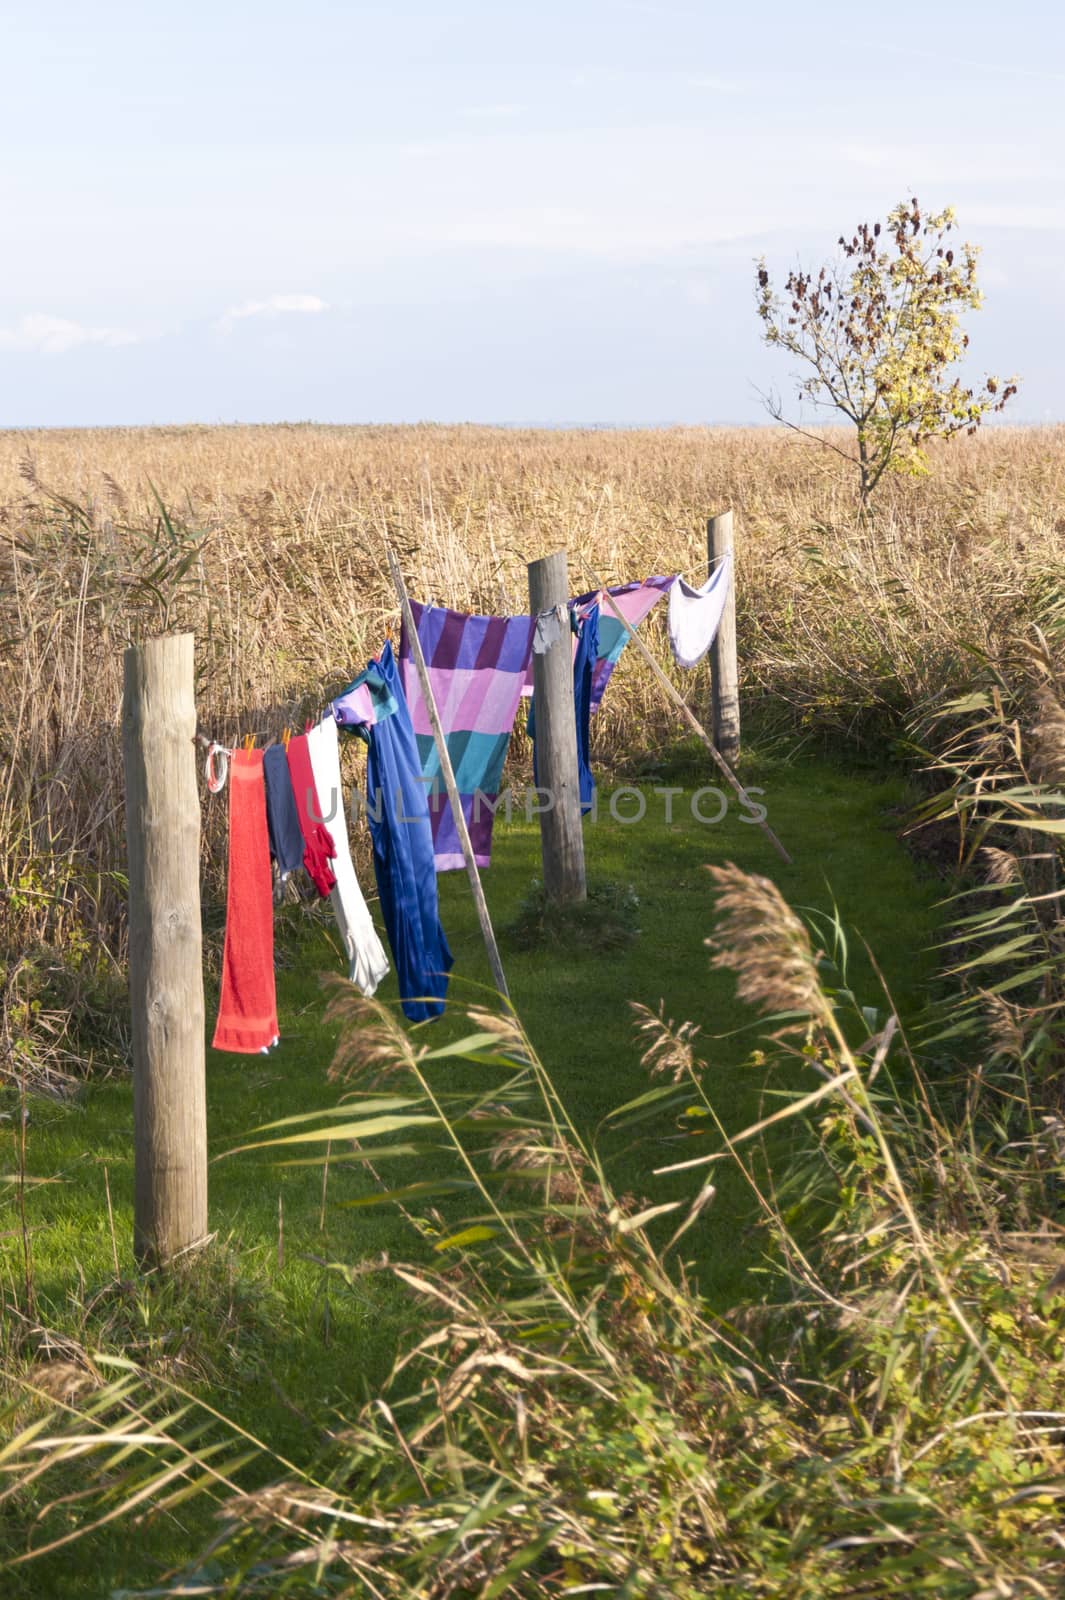 Clothes Line at the Bay of Ahrenshoop